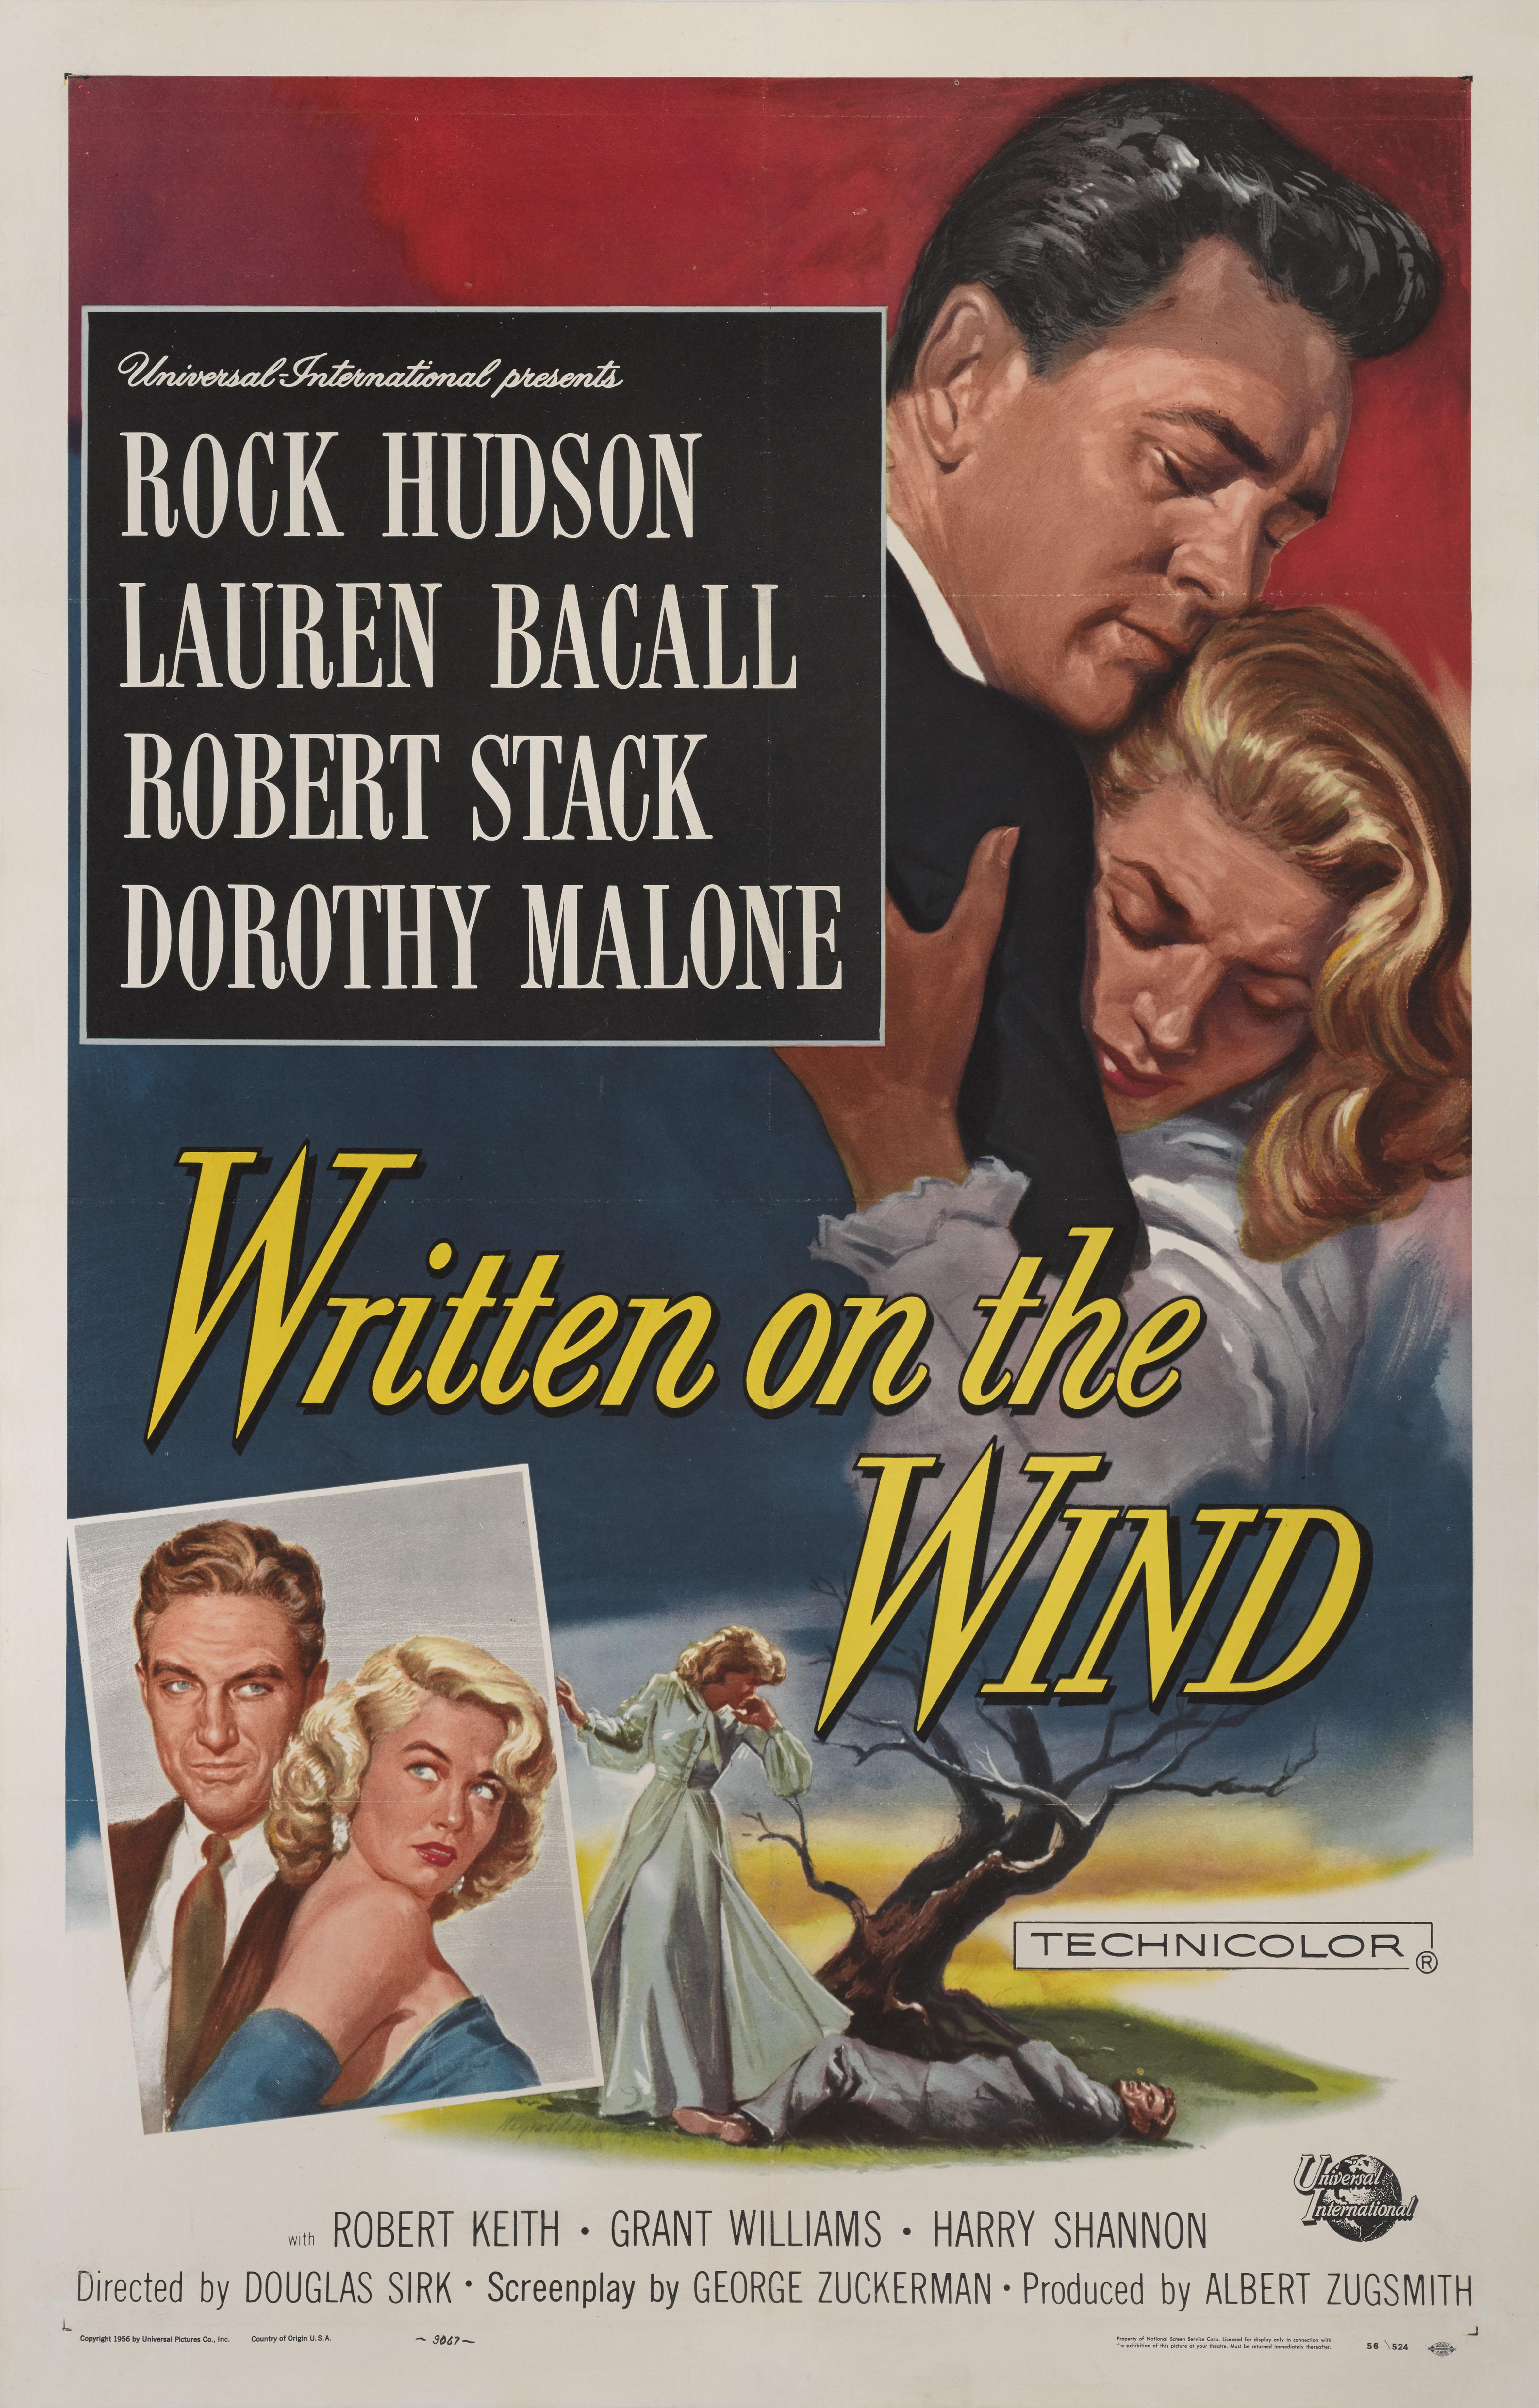 Original Us film poster for the 1956 drama directed by Douglas Sirk and starred Rock Hudson, Lauren Bacall, Robert Stack.
The art work is by the America Artis and illustrator Reynold Brown (1917-1991).
This poster is conservation linen backed and